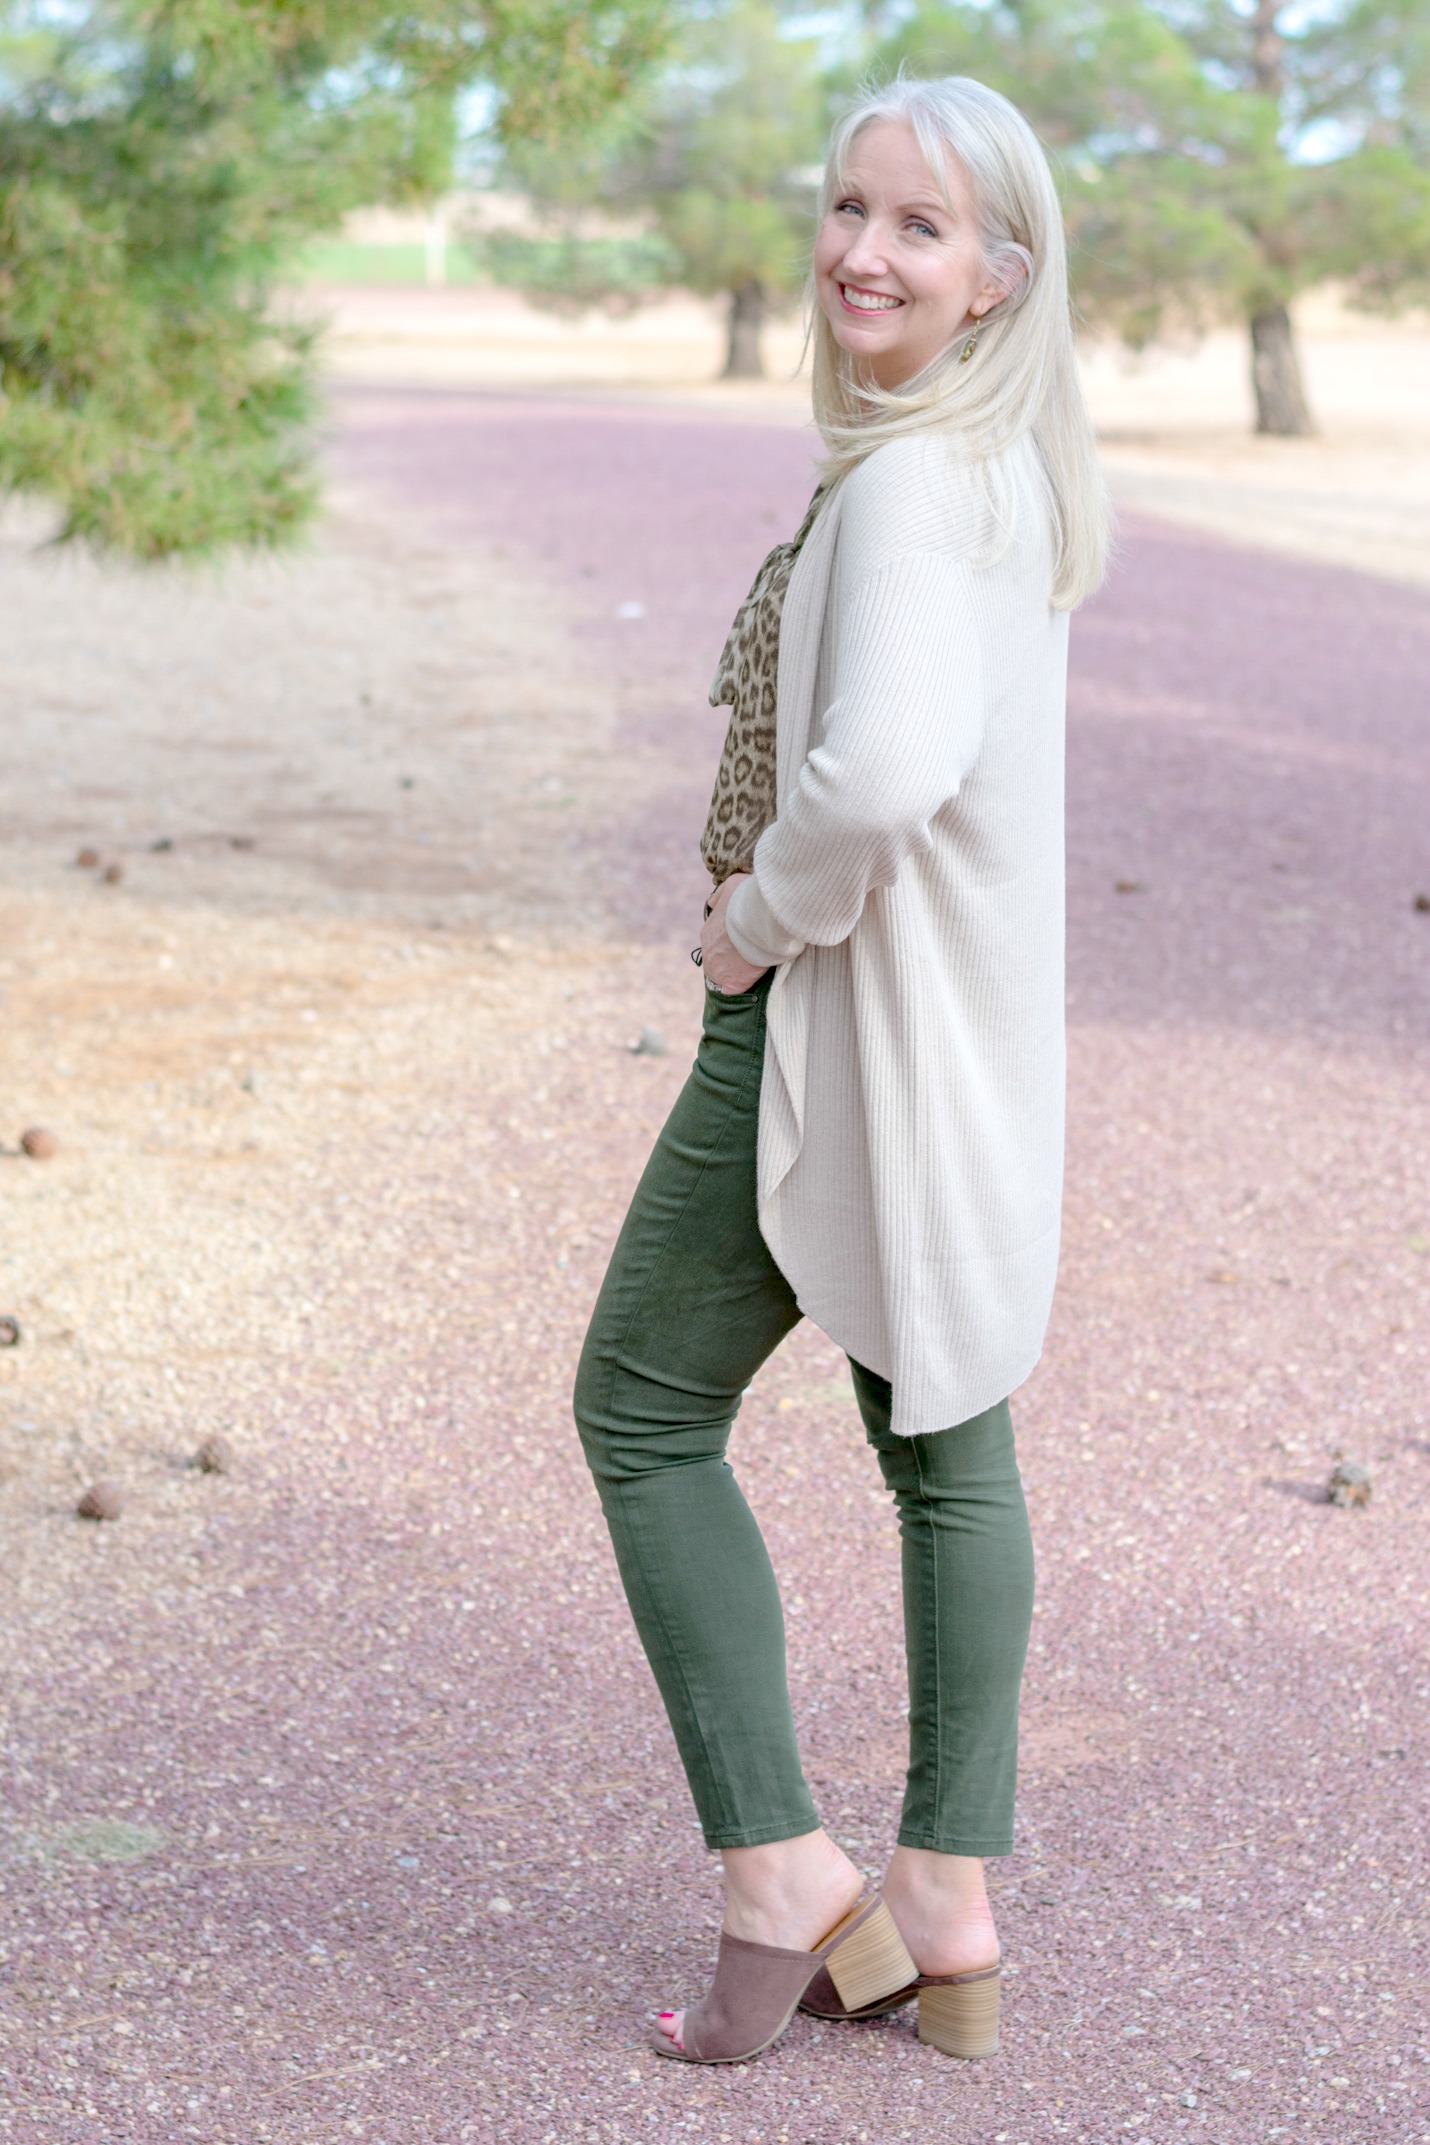 Colored Jeans and Leopard Print Blouse 7